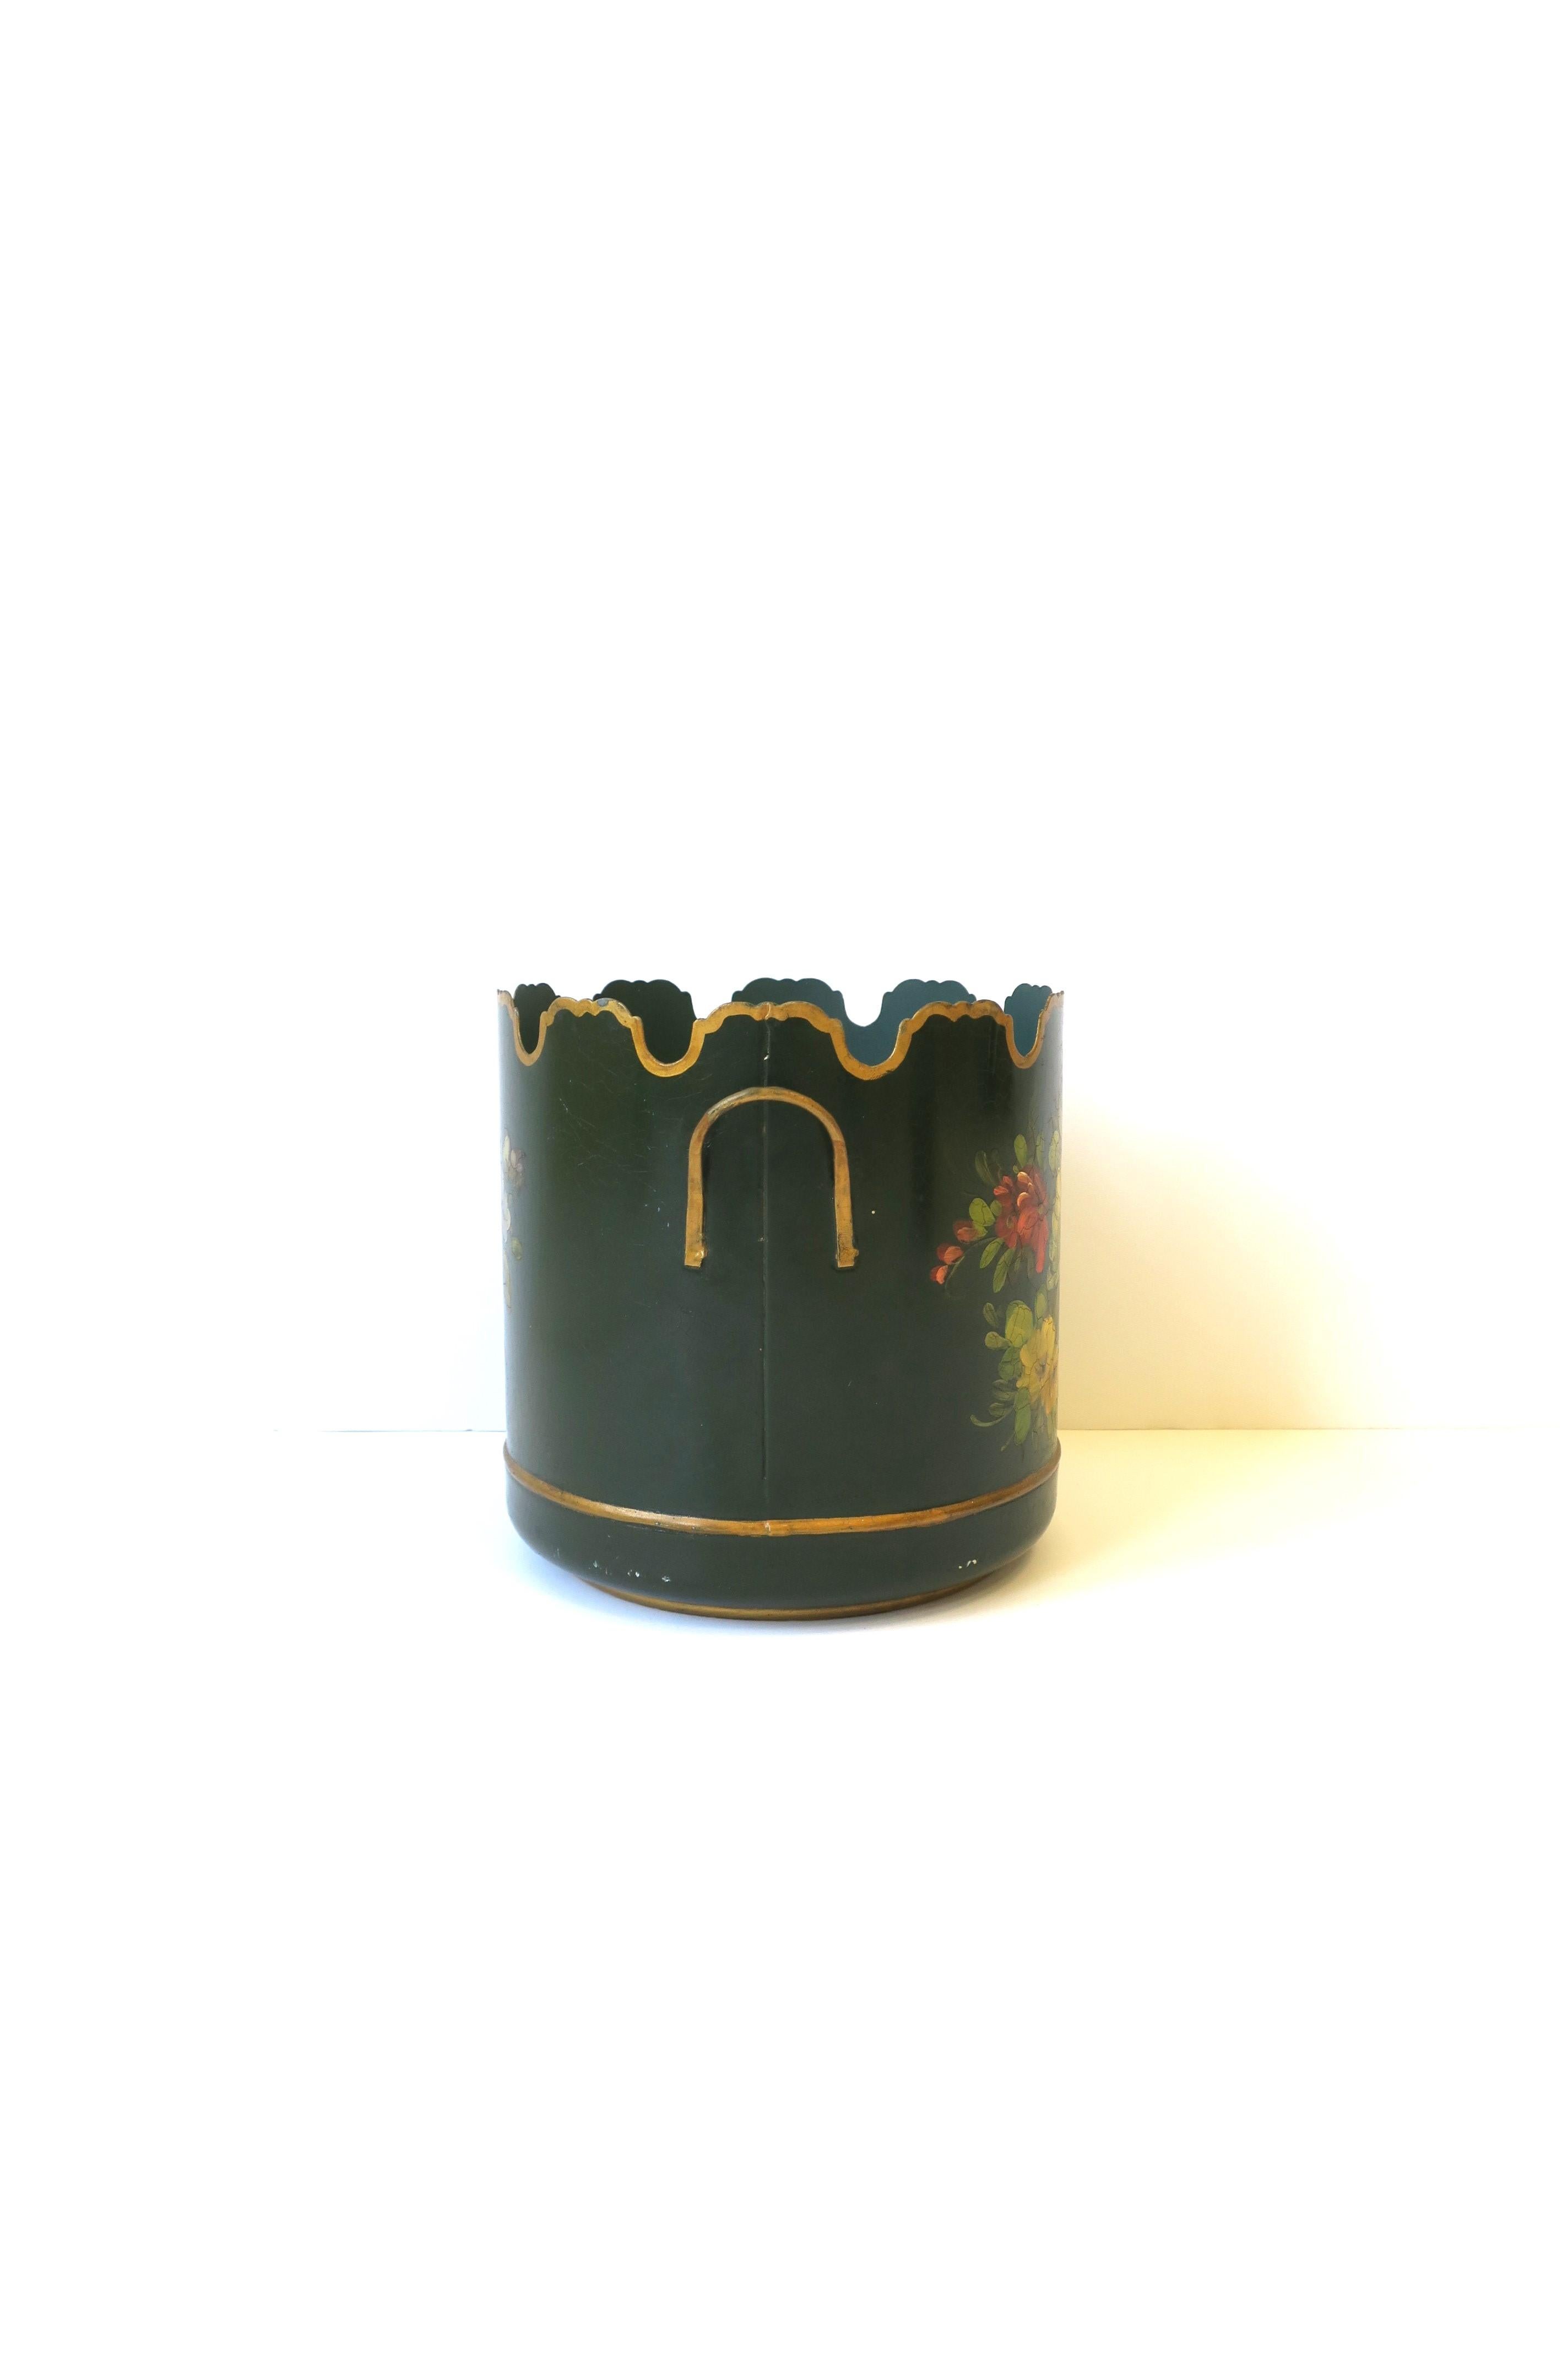 French Tôle Green & Gold Jardinière Cachepot with Scalloped Edge, 20th c France For Sale 2